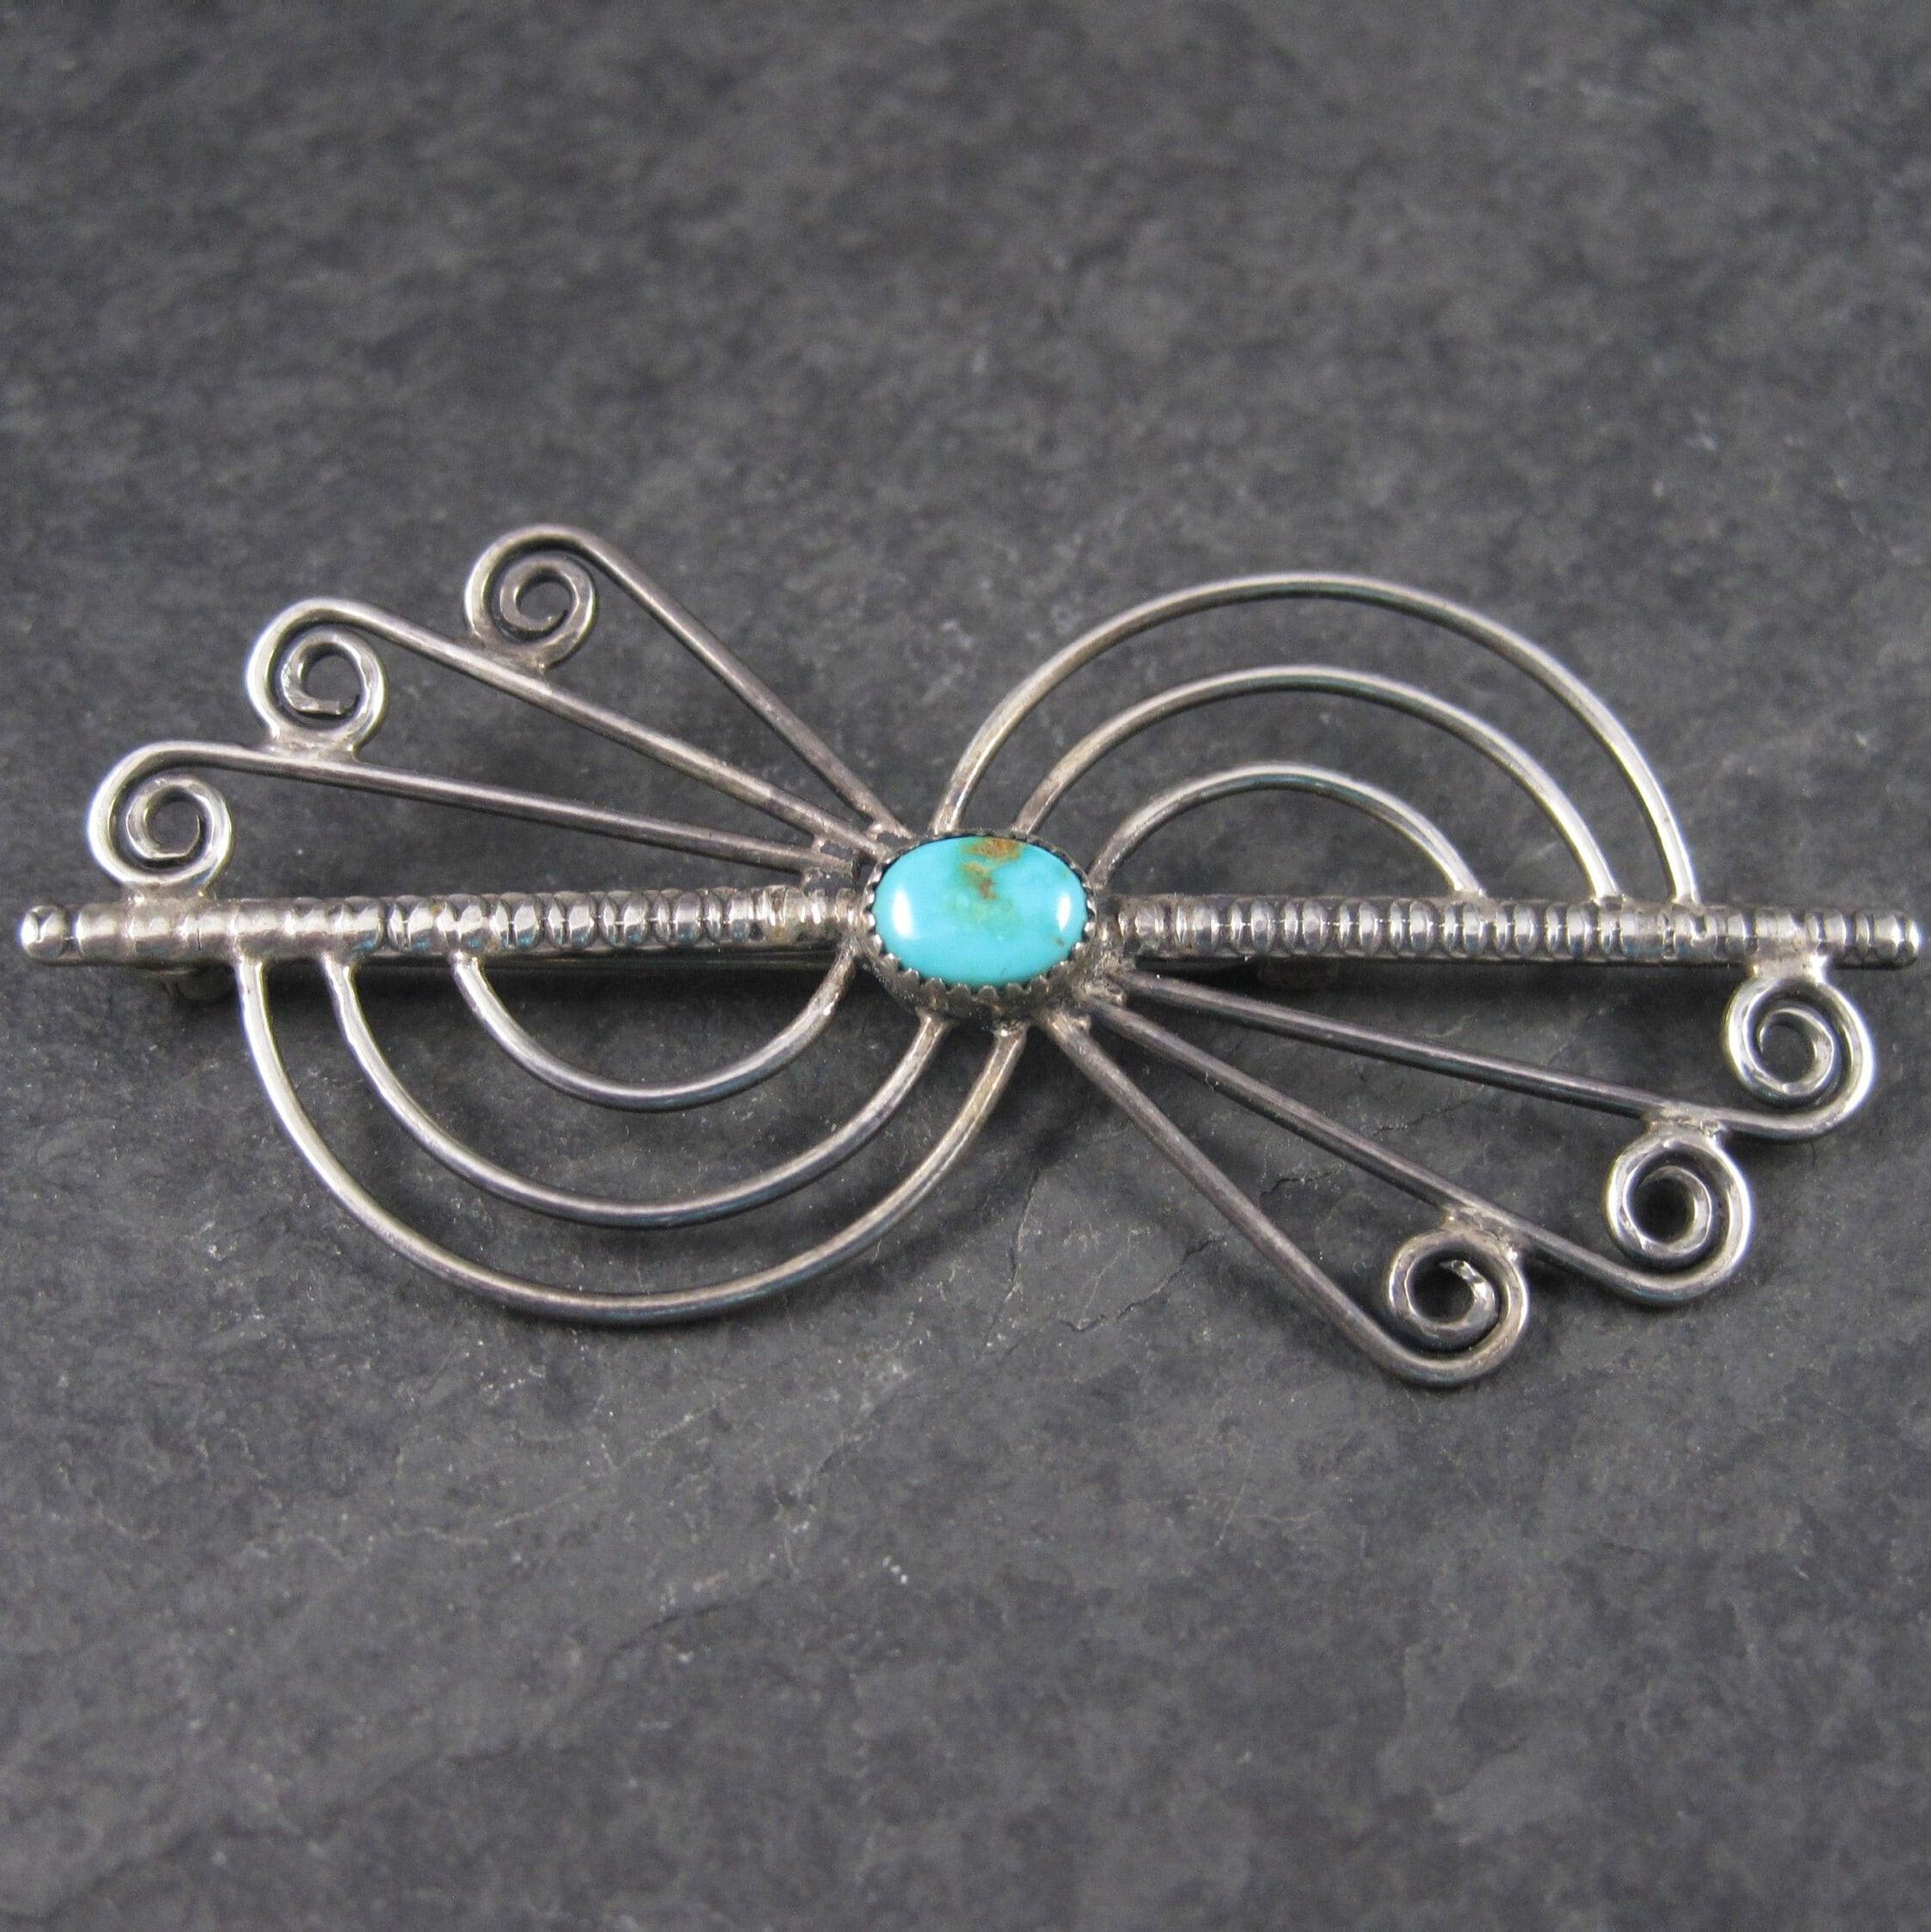 This beautiful sterling silver brooch is Native American in design.
It features a beautiful natural 5x7mm turquoise stone.

The brooch measures 1 1/16 by 2 1/2 inches.

It is unmarked but verified as sterling.
Excellent condition
